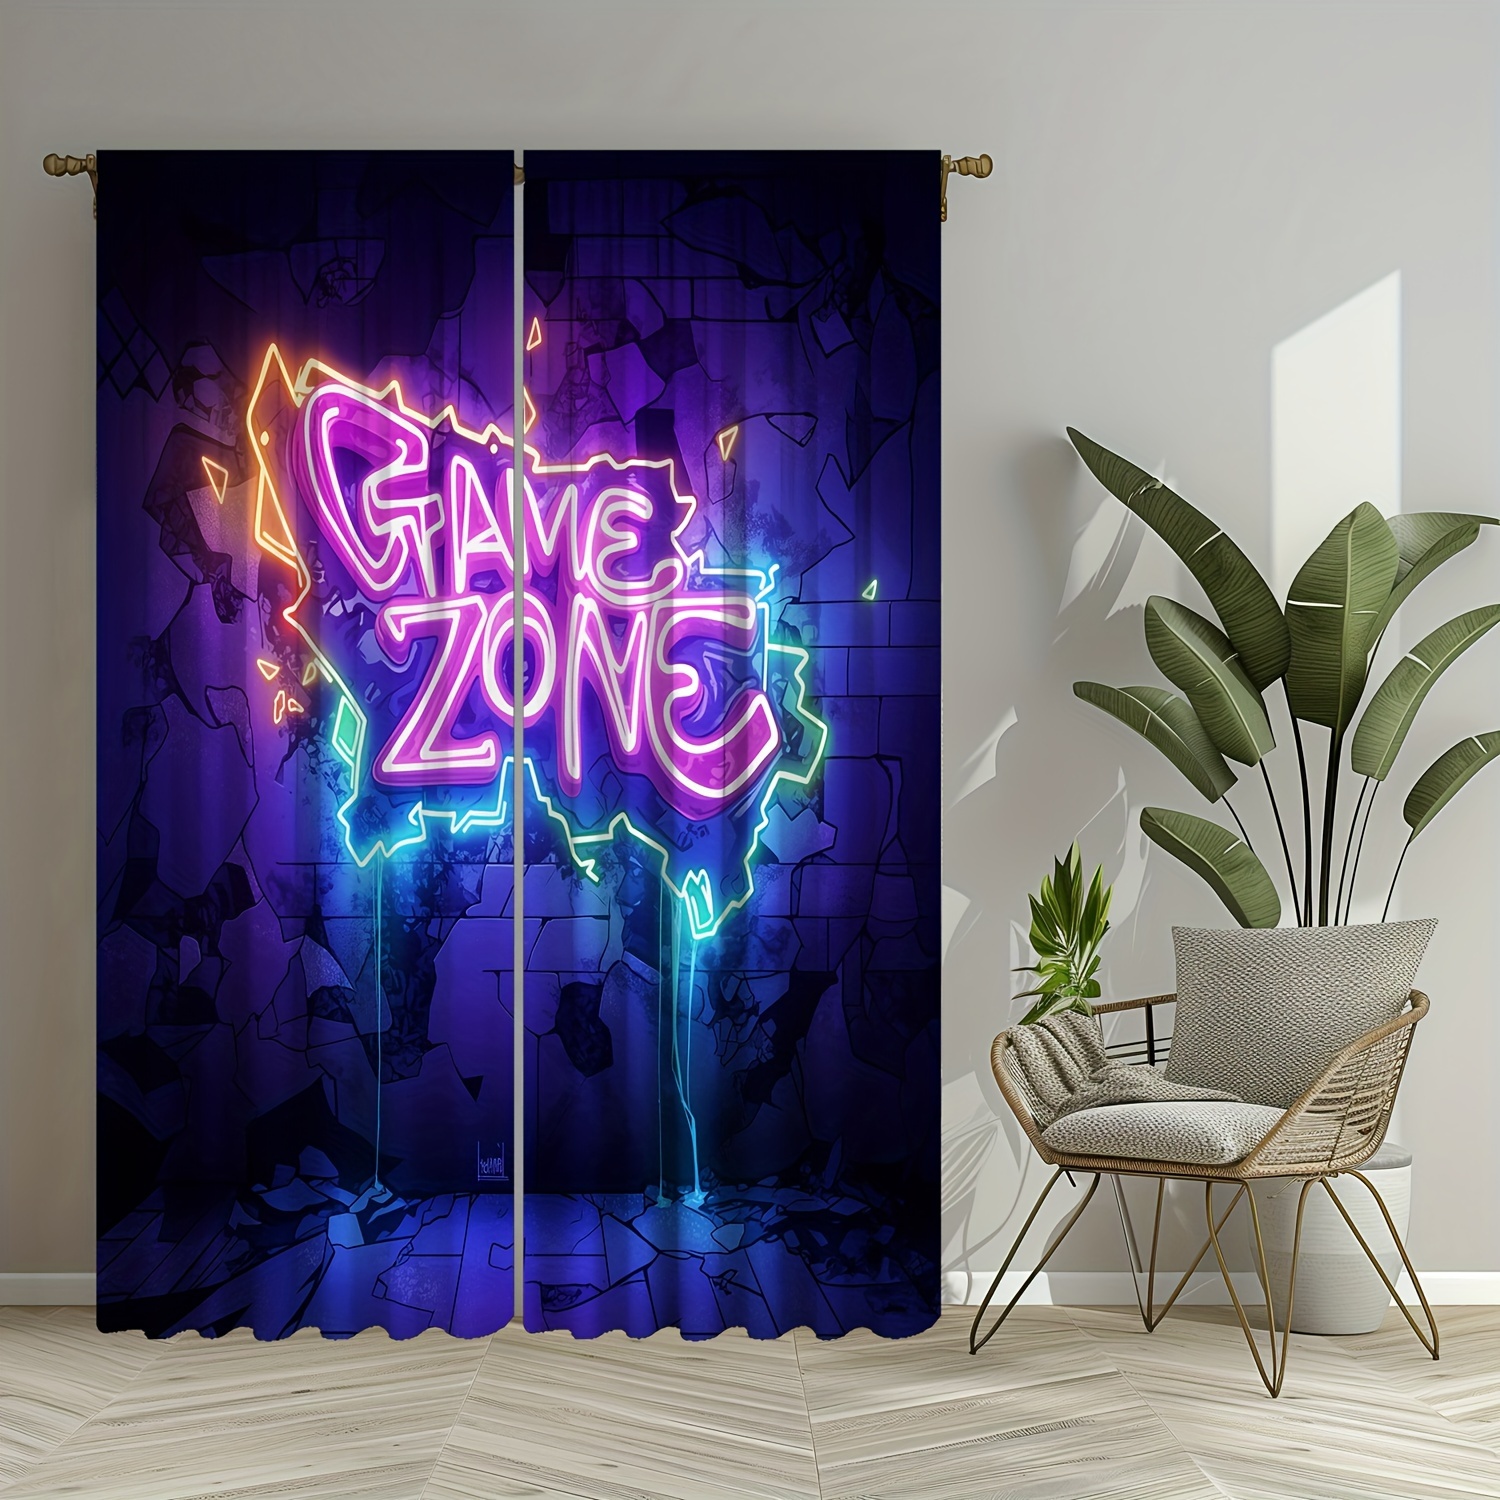 

2pcs Game Zone Sign Printed Curtains, Decorative Window Drapes, Window Treatments For Bedroom Living Room, Home Decoration, Room Decoration